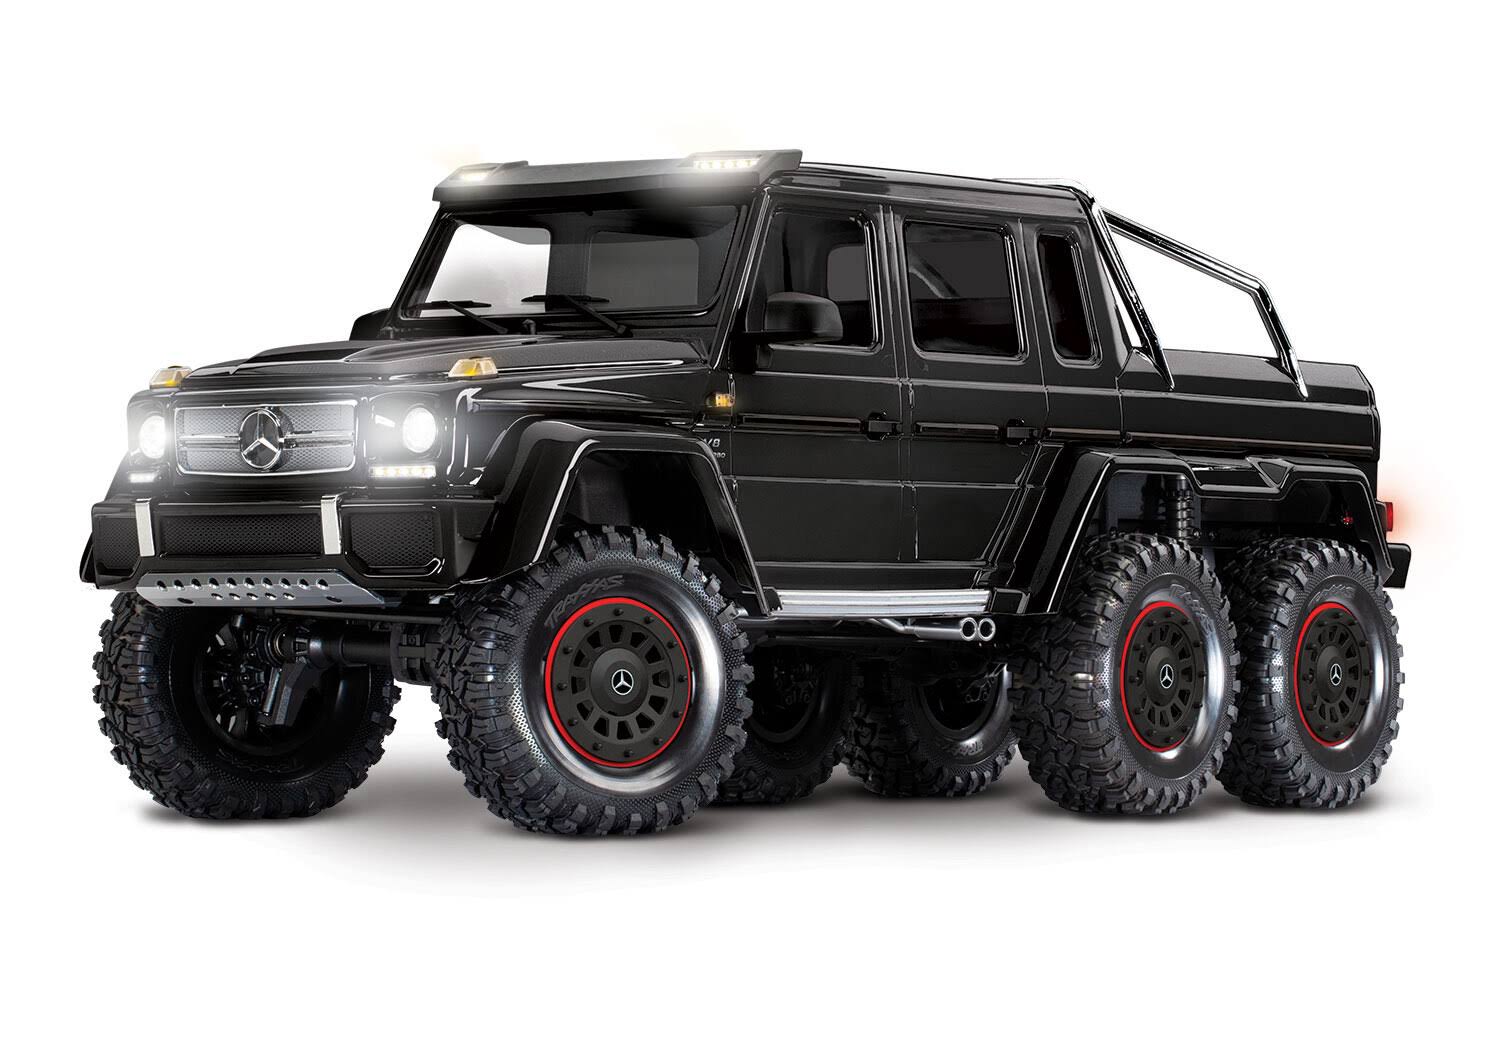 Traxxas Mercedes Benz G63 6x6 Brushed RC Model - Black, Scale 1:10